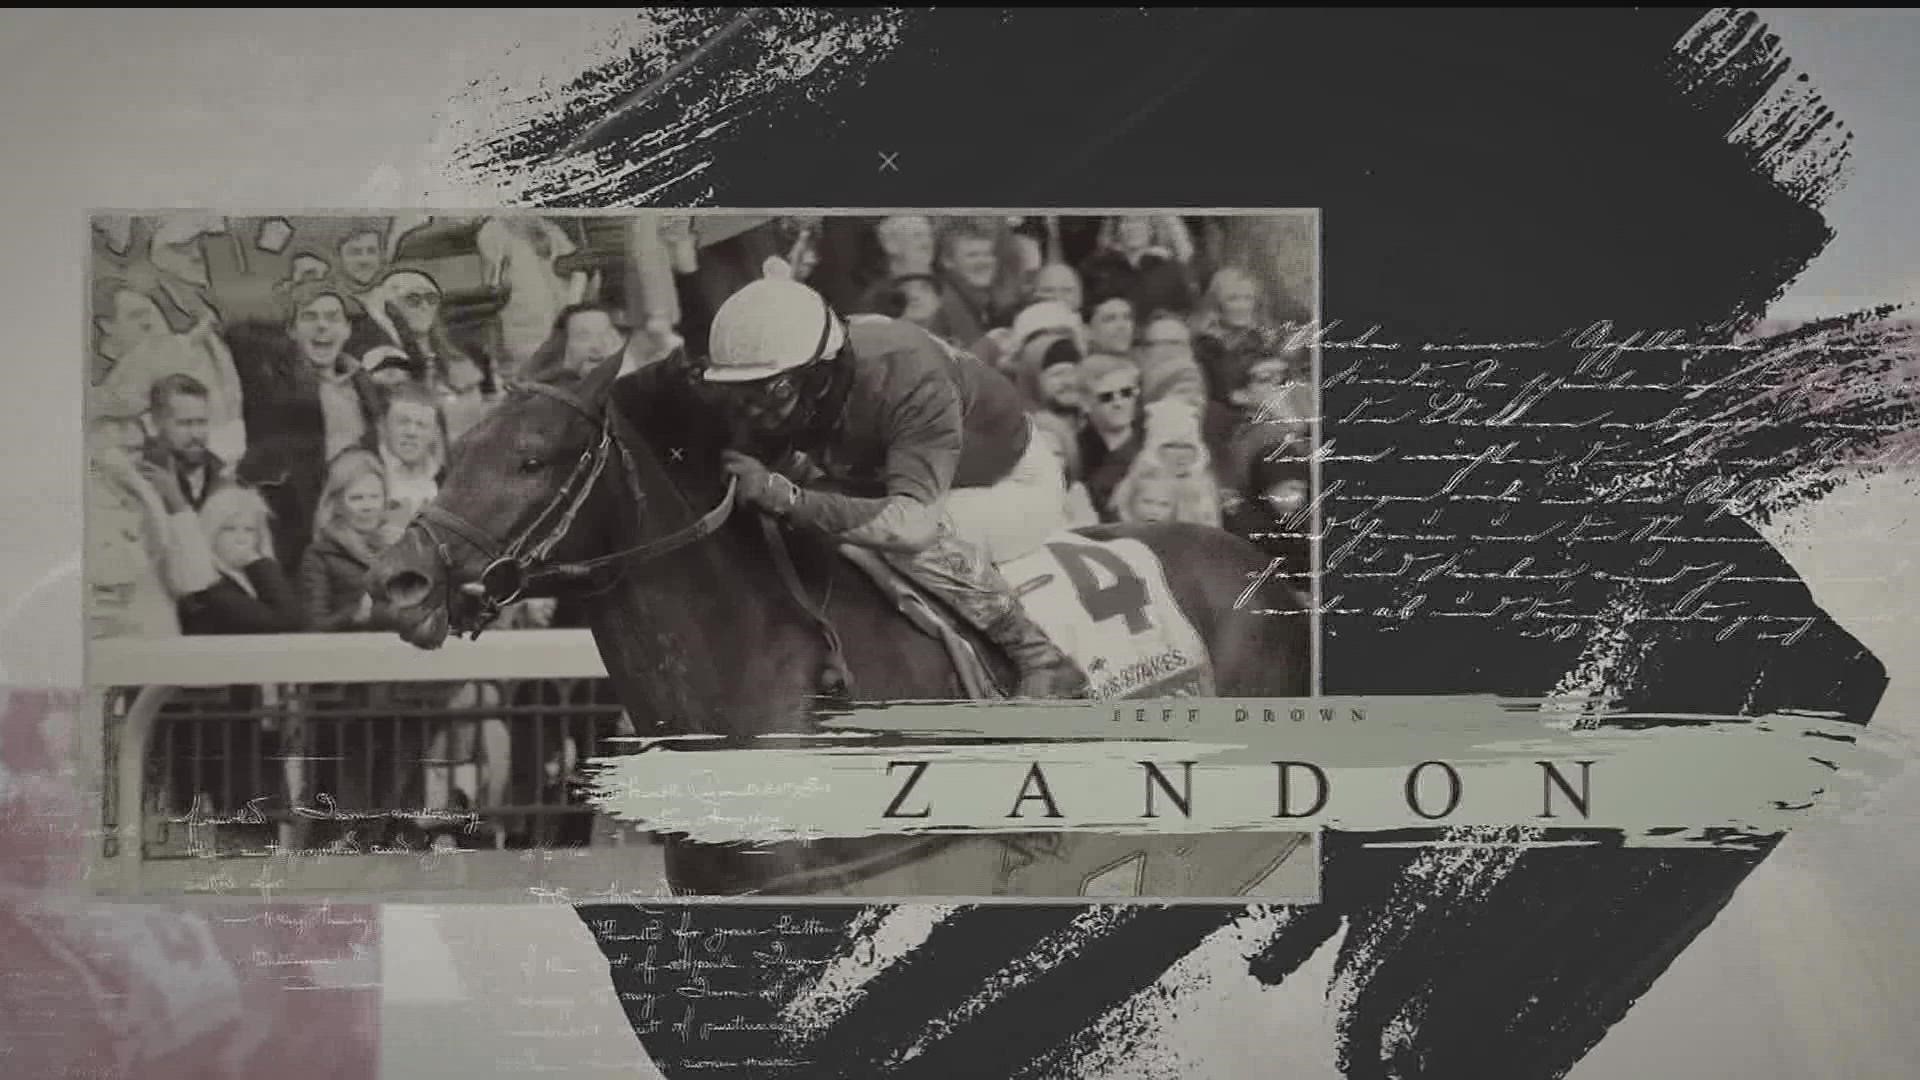 While The Garland of Roses went to longshot Rich Strike, Minnesota-owned Zandon finished third.